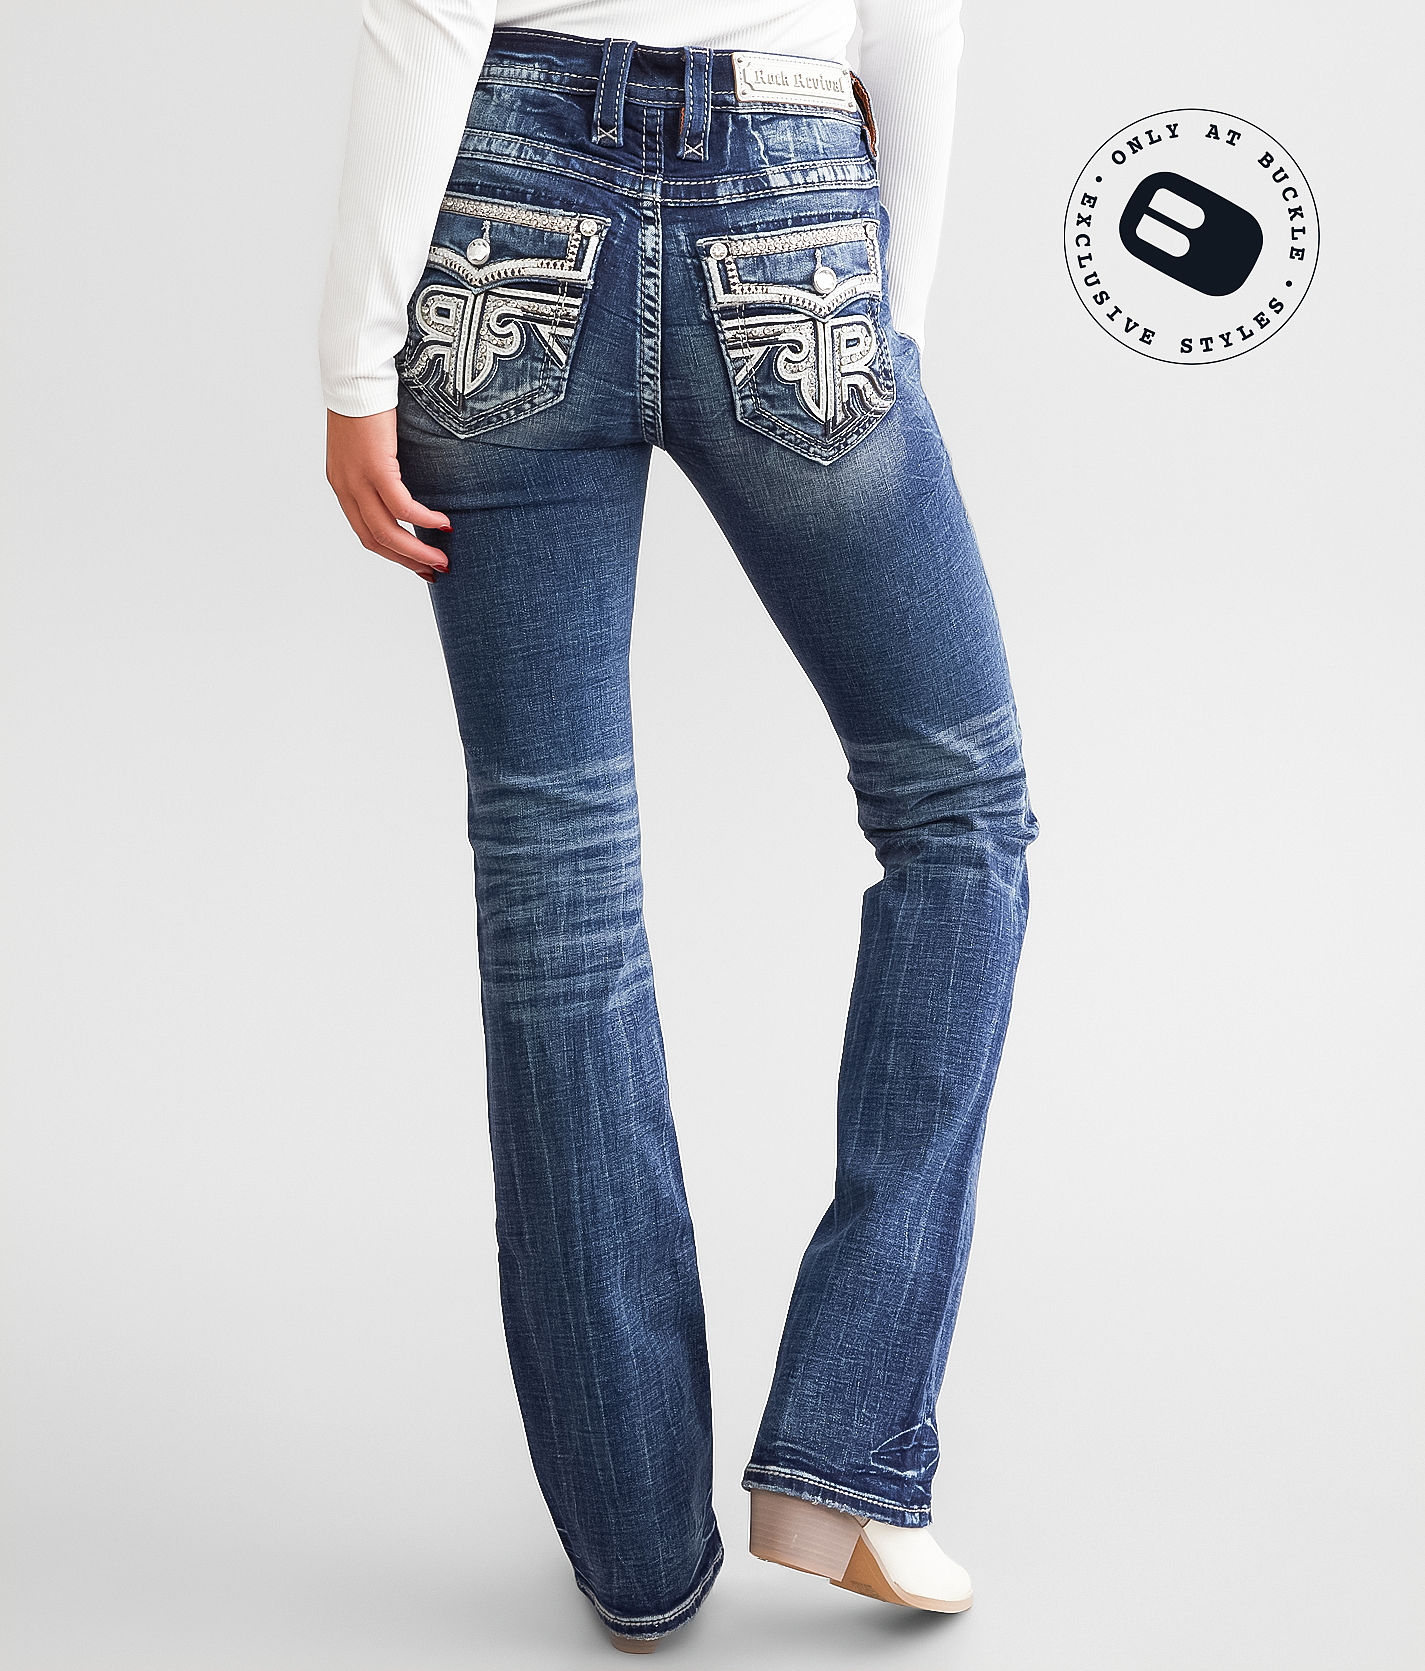 Rock Revival Semah Mid-Rise Tailored Boot Stretch Jean - Women's Jeans in  Semah MT202